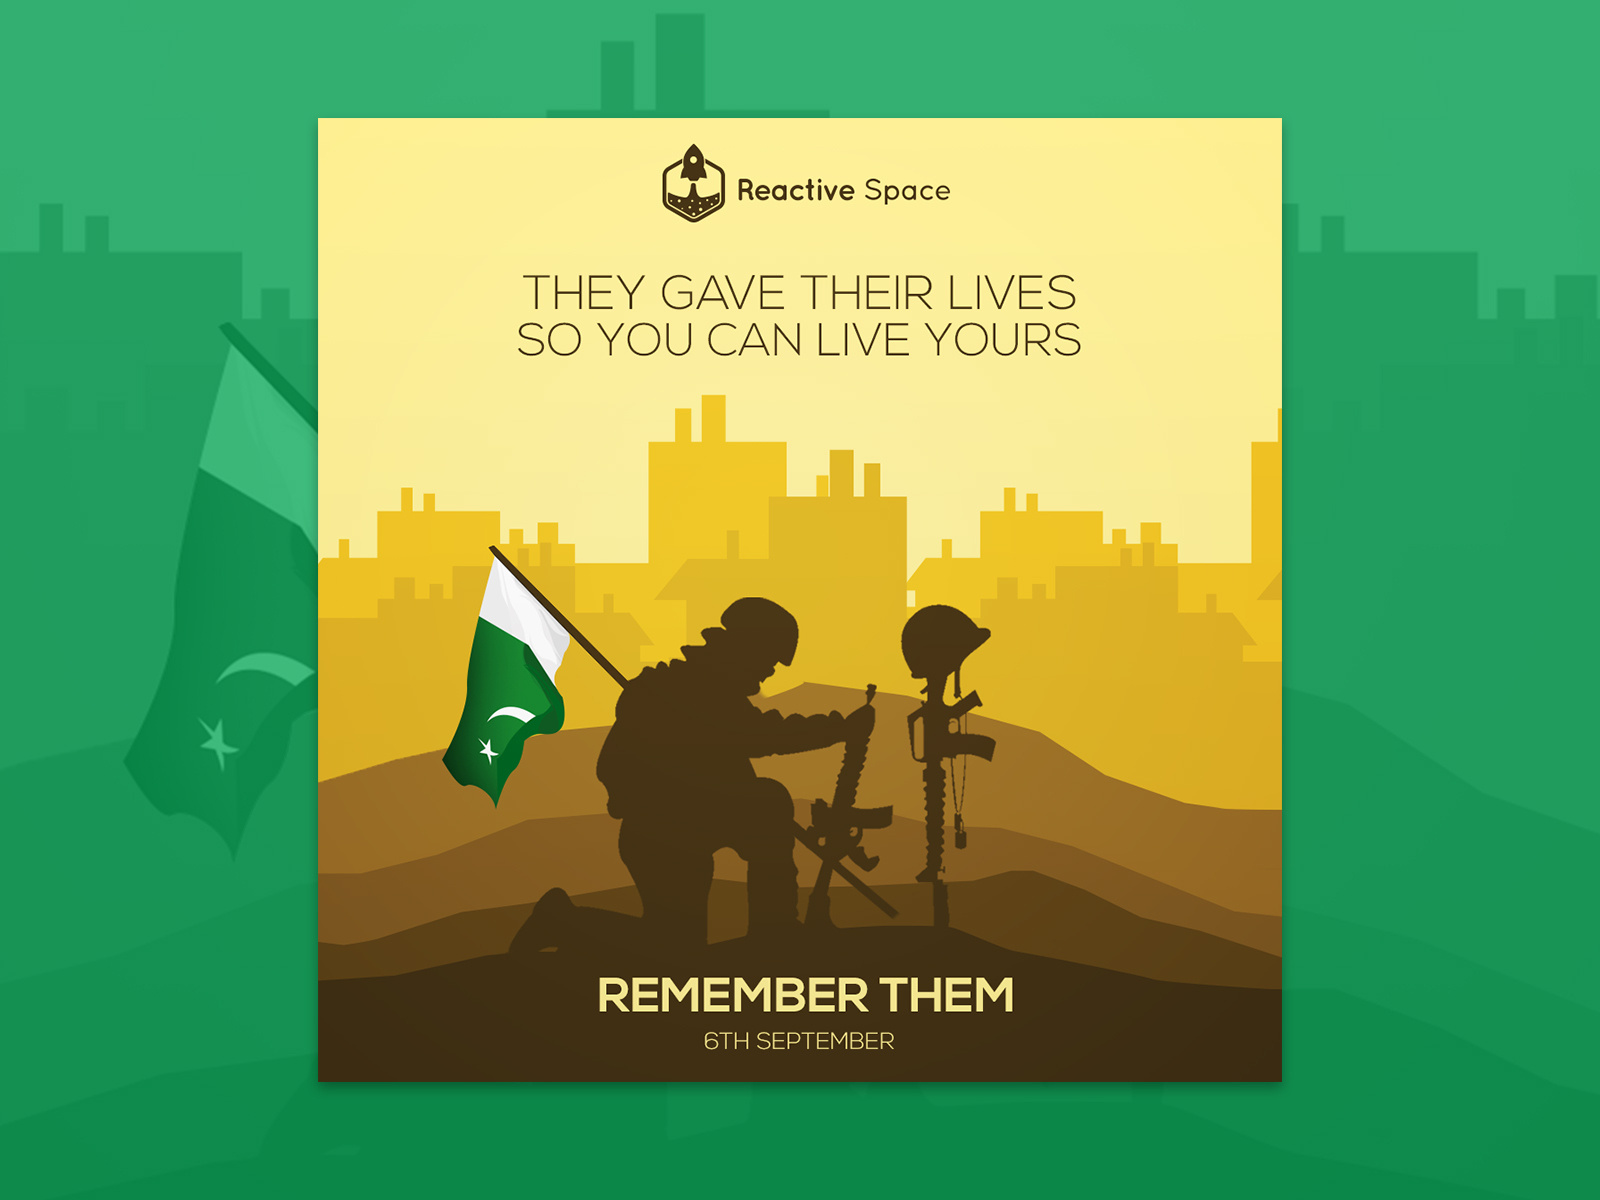 creative writing on defence day